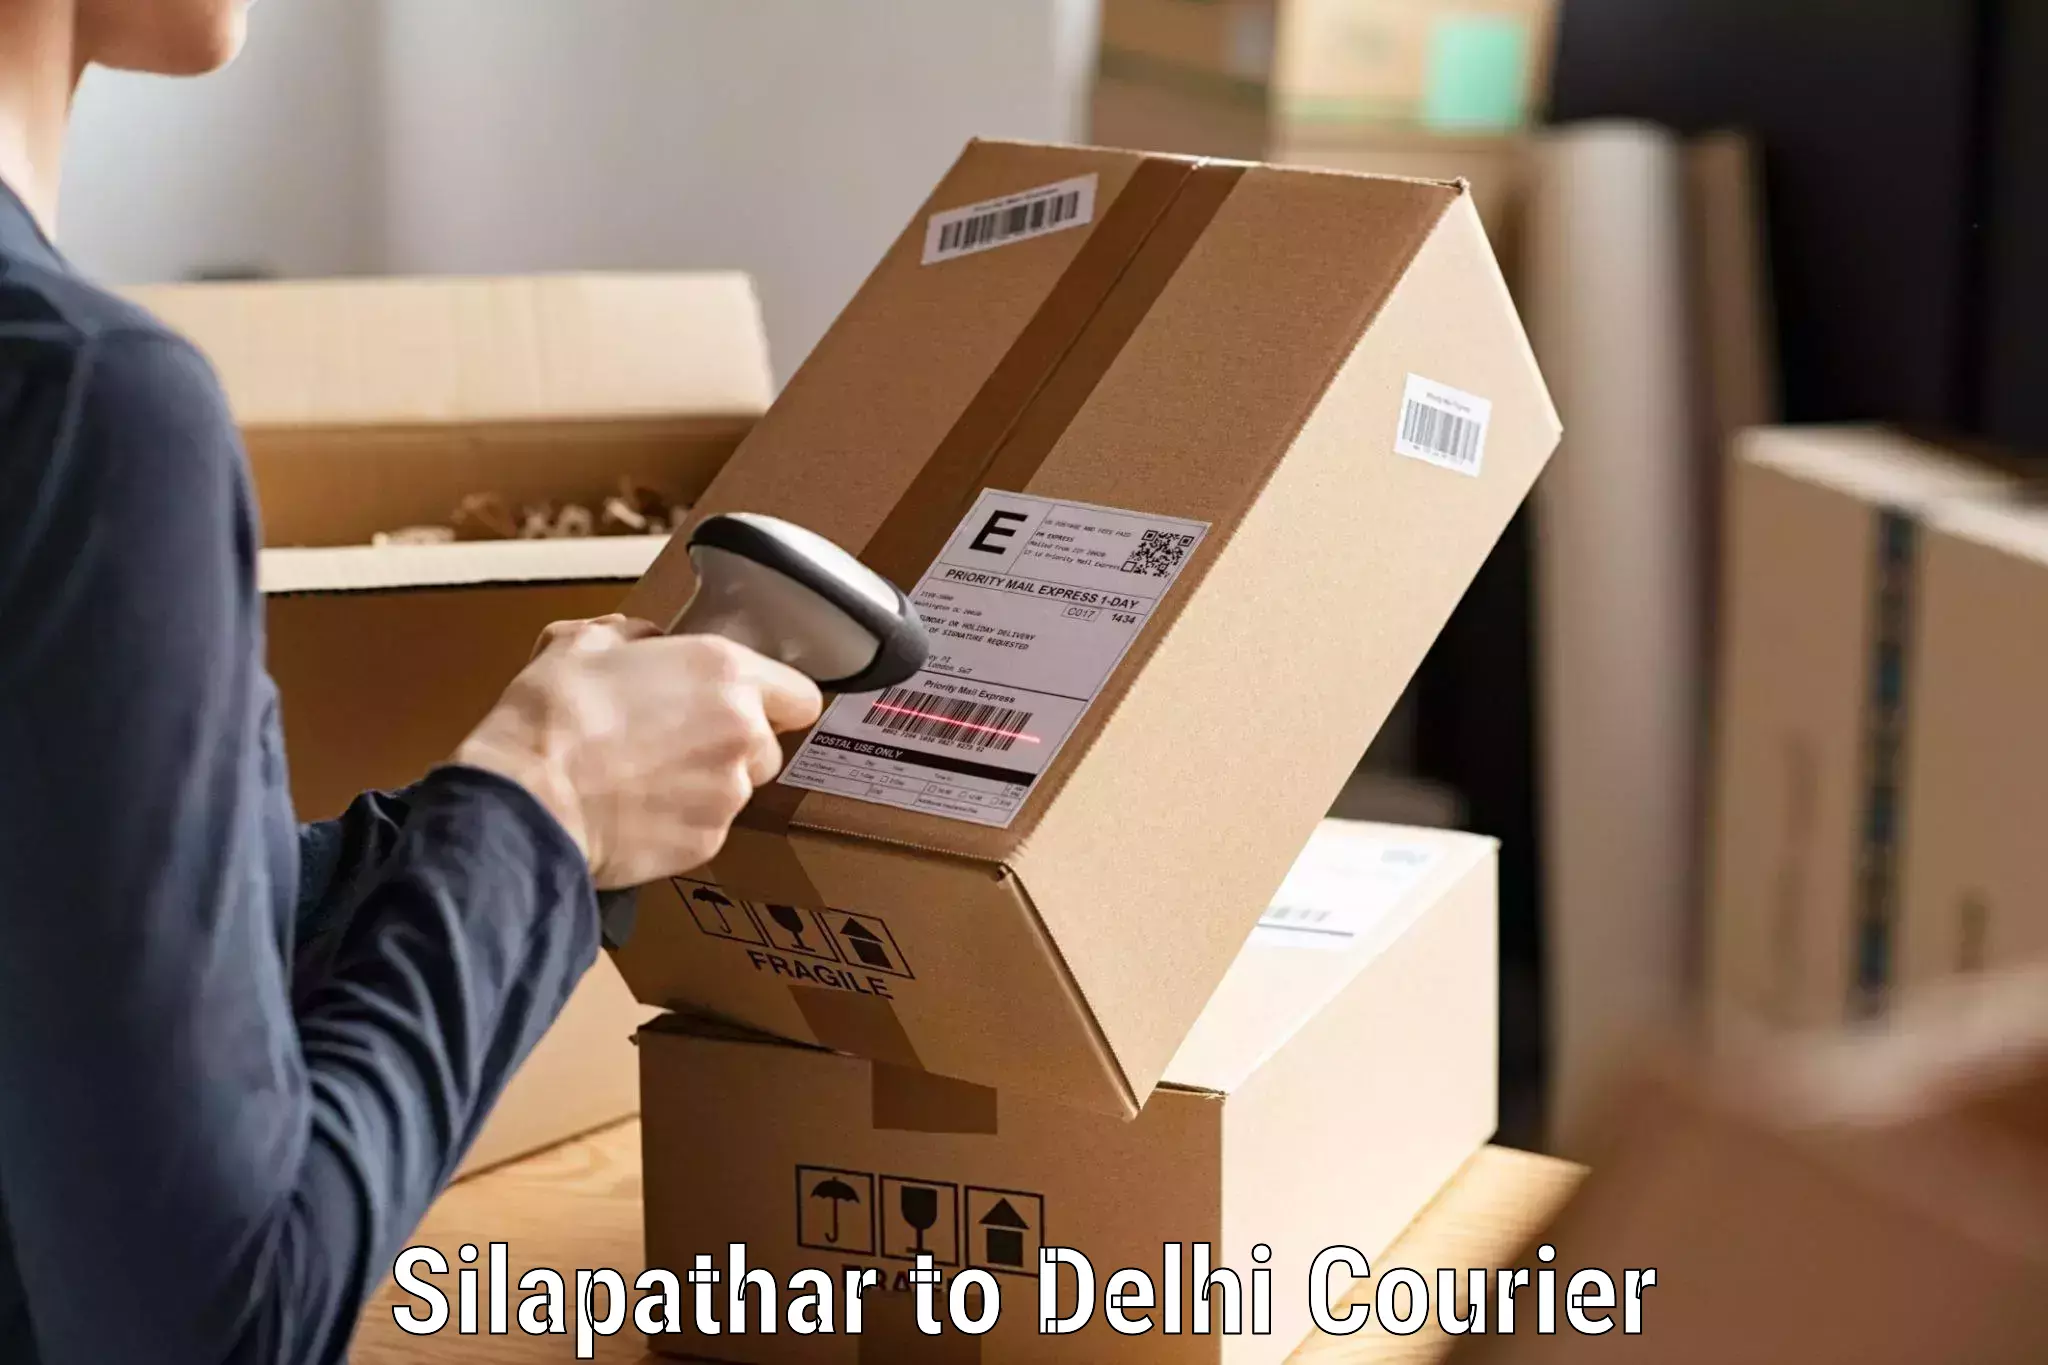 Cash on delivery service Silapathar to Delhi